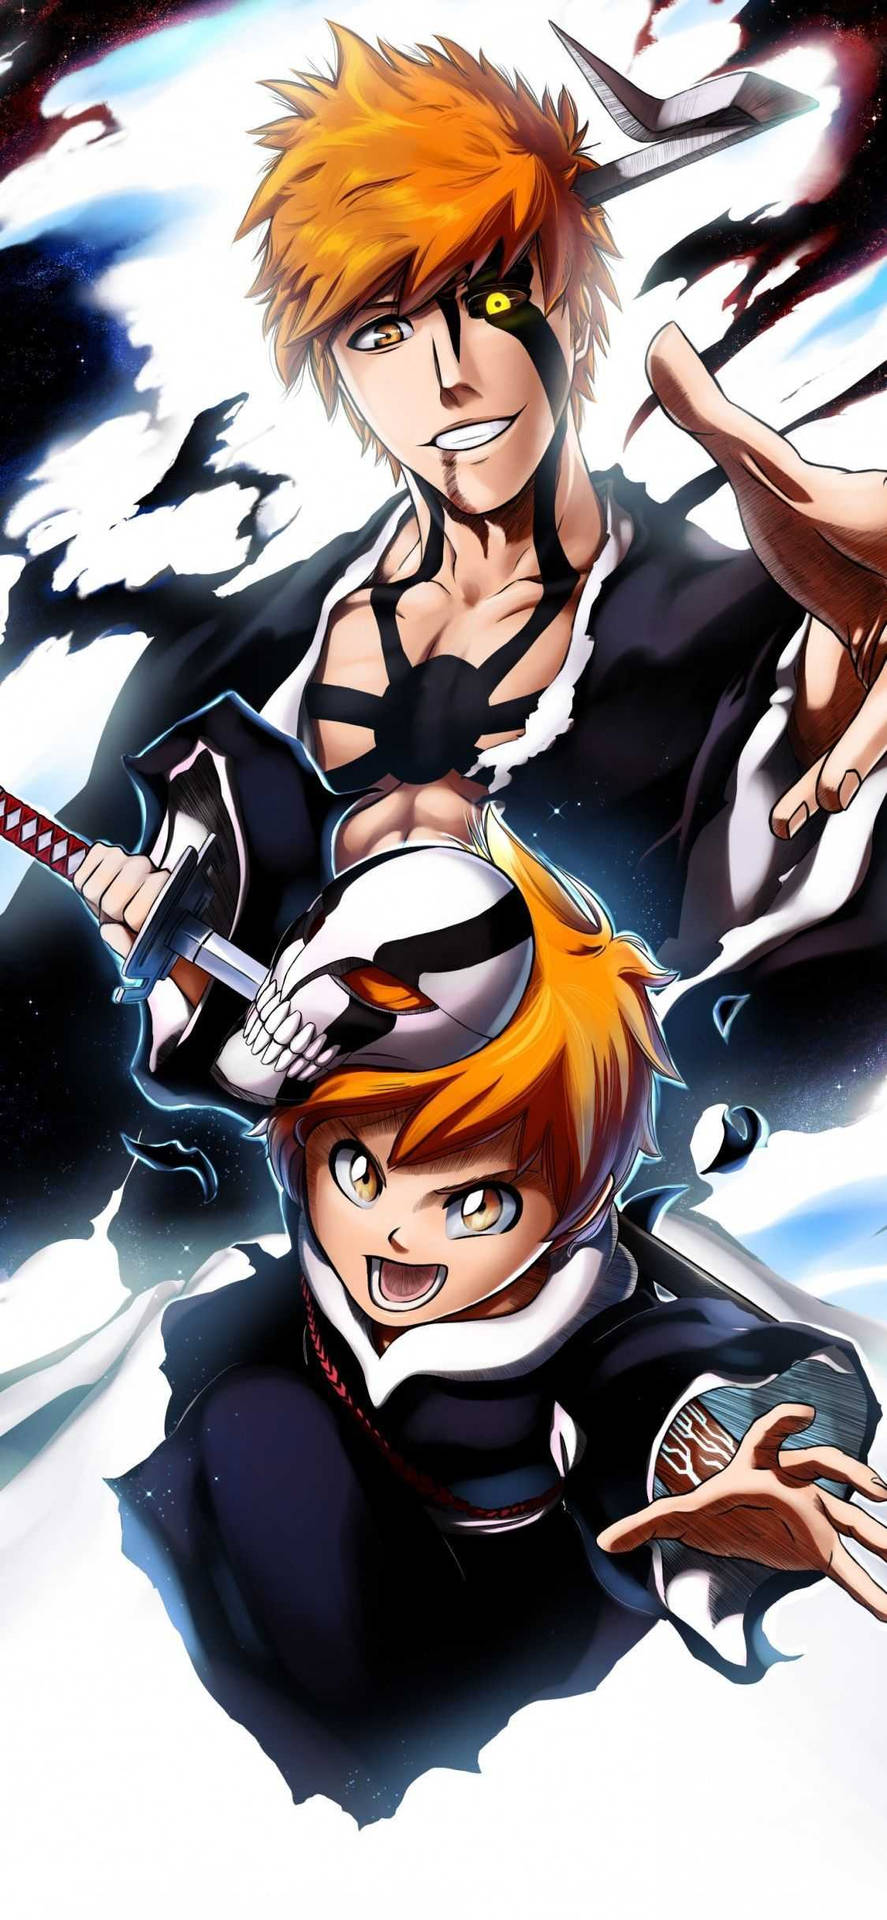 Vasto Lorde And Young Hollow Ichigo Bleach Iphone Background